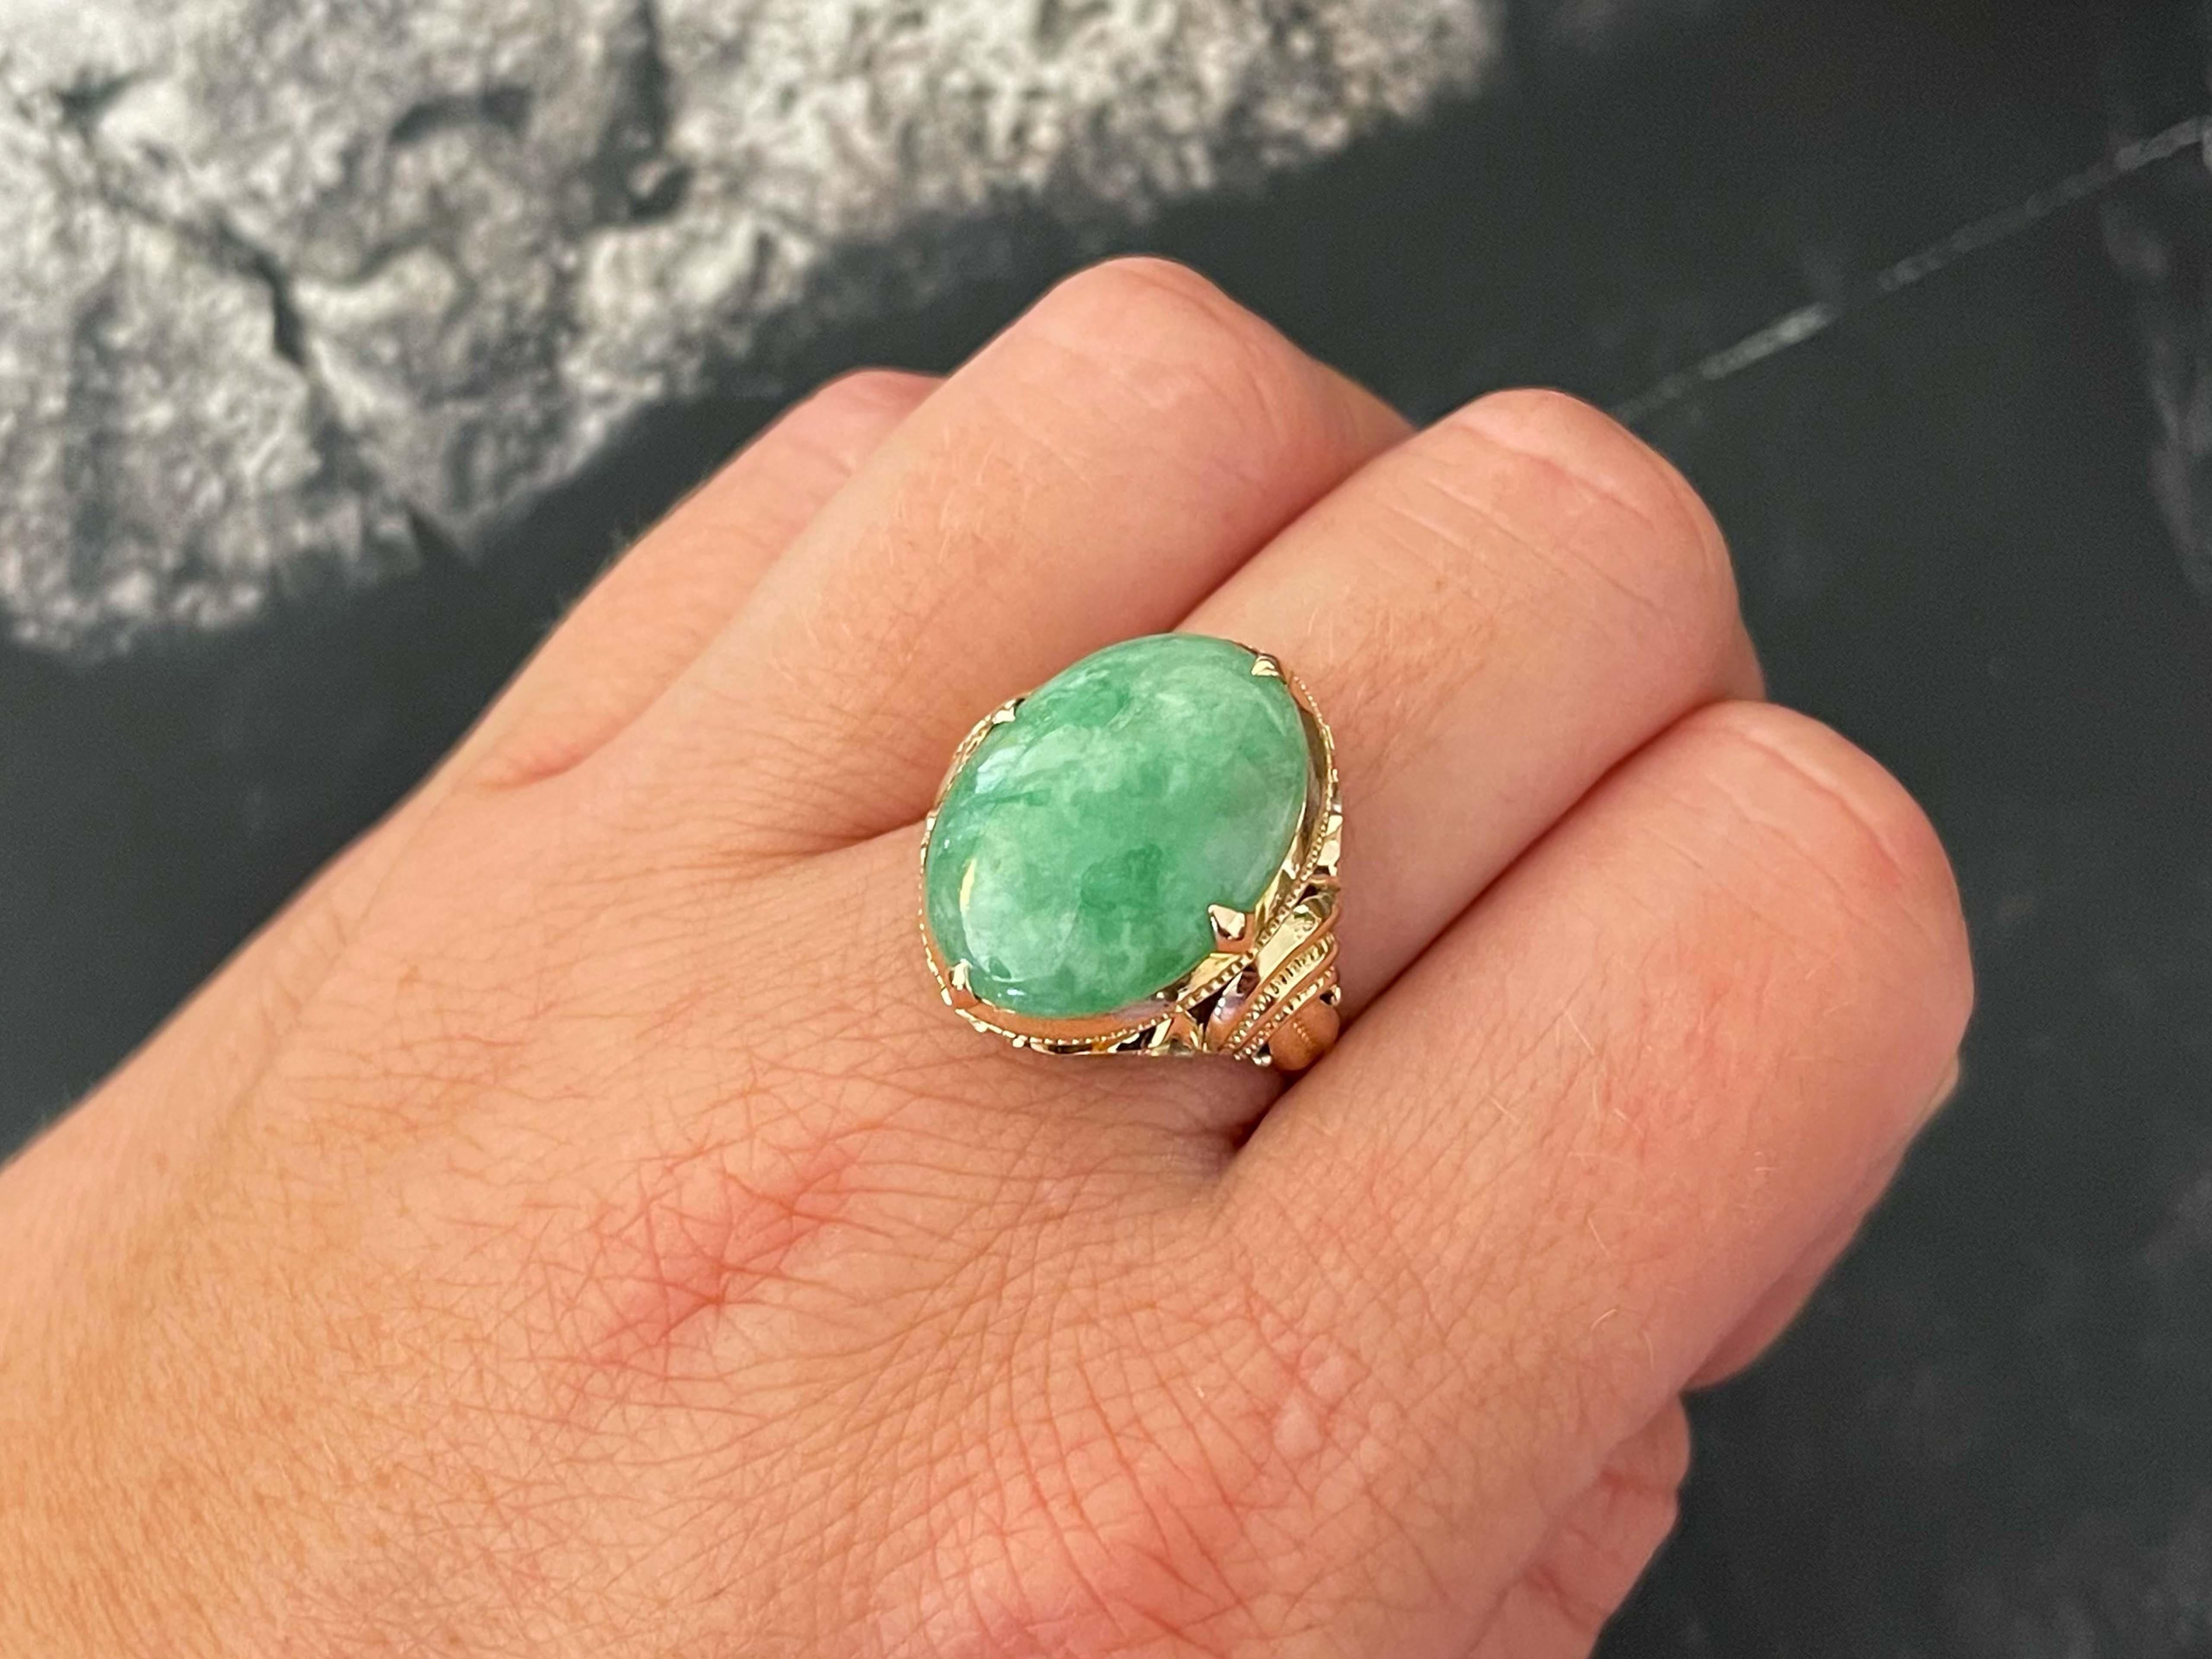 Item Specifications:

Metal: 14K Rose Gold

Style: Statement Ring

Ring Size: 8.5 (resizing available for a fee)

Total Weight: 5.9 Grams

Gemstone Specifications:

Center Gemstone: Jade

Shape: Oval

Color: Mottled Green

Cut: Cabochon 

Gemstone